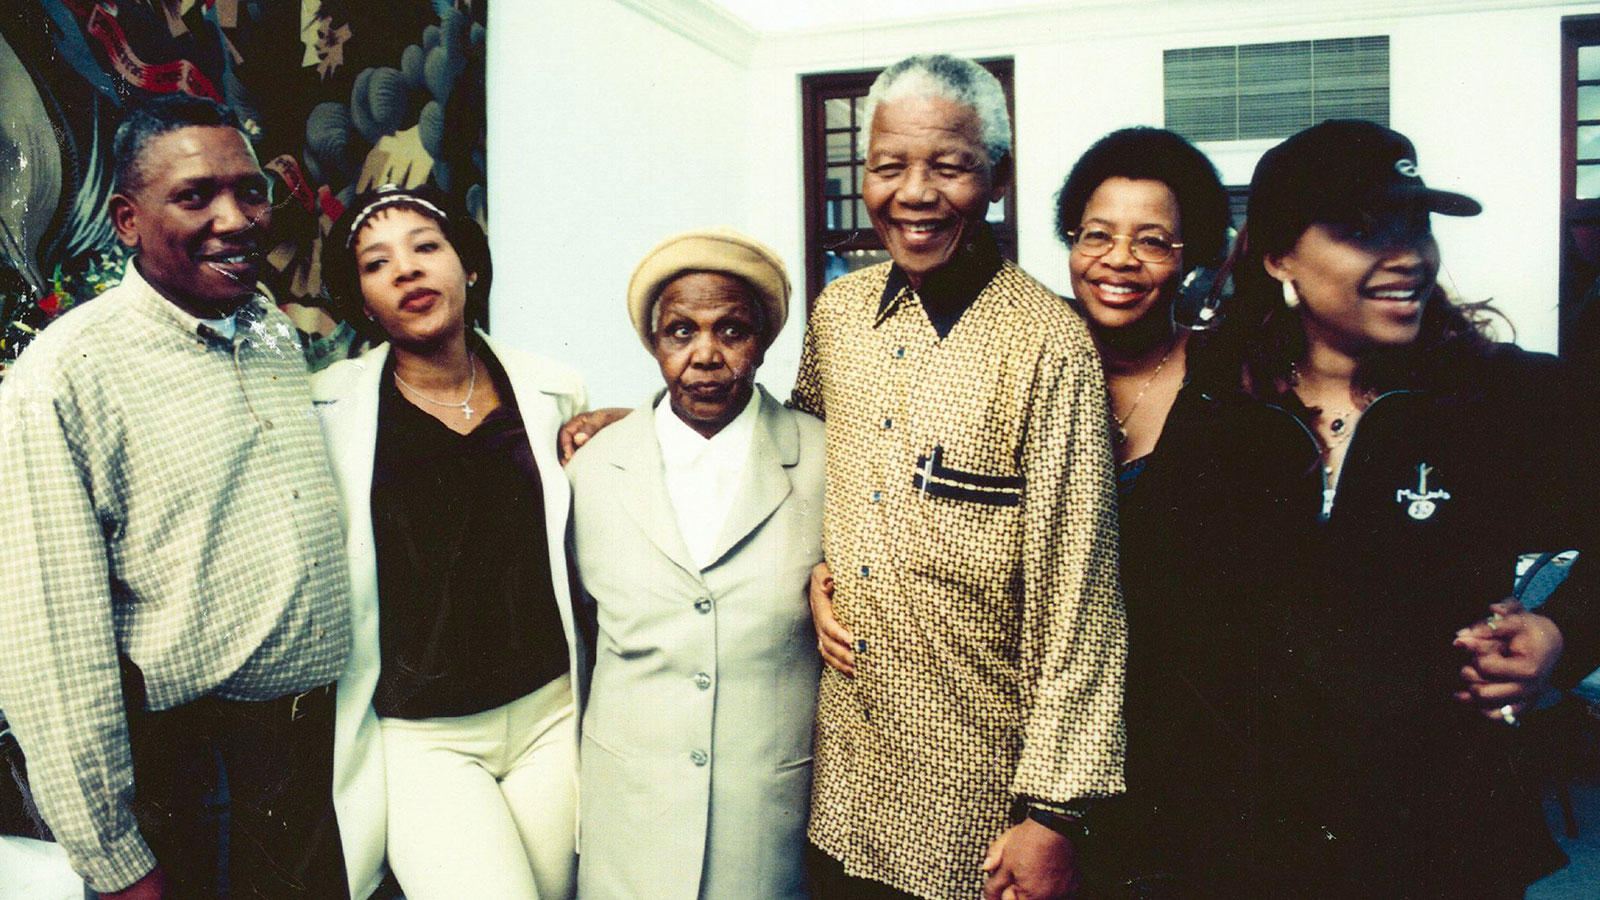 Nelson Mandela with family and soon-to-be third wife Graça Machel (second right) on the day she was formally introduced to everyone. "I already knew long before that my father was in a relationship with Mrs. Machel, and I had met her a few years back at a UNESCO conference in Paris," said Dr. Mandela.